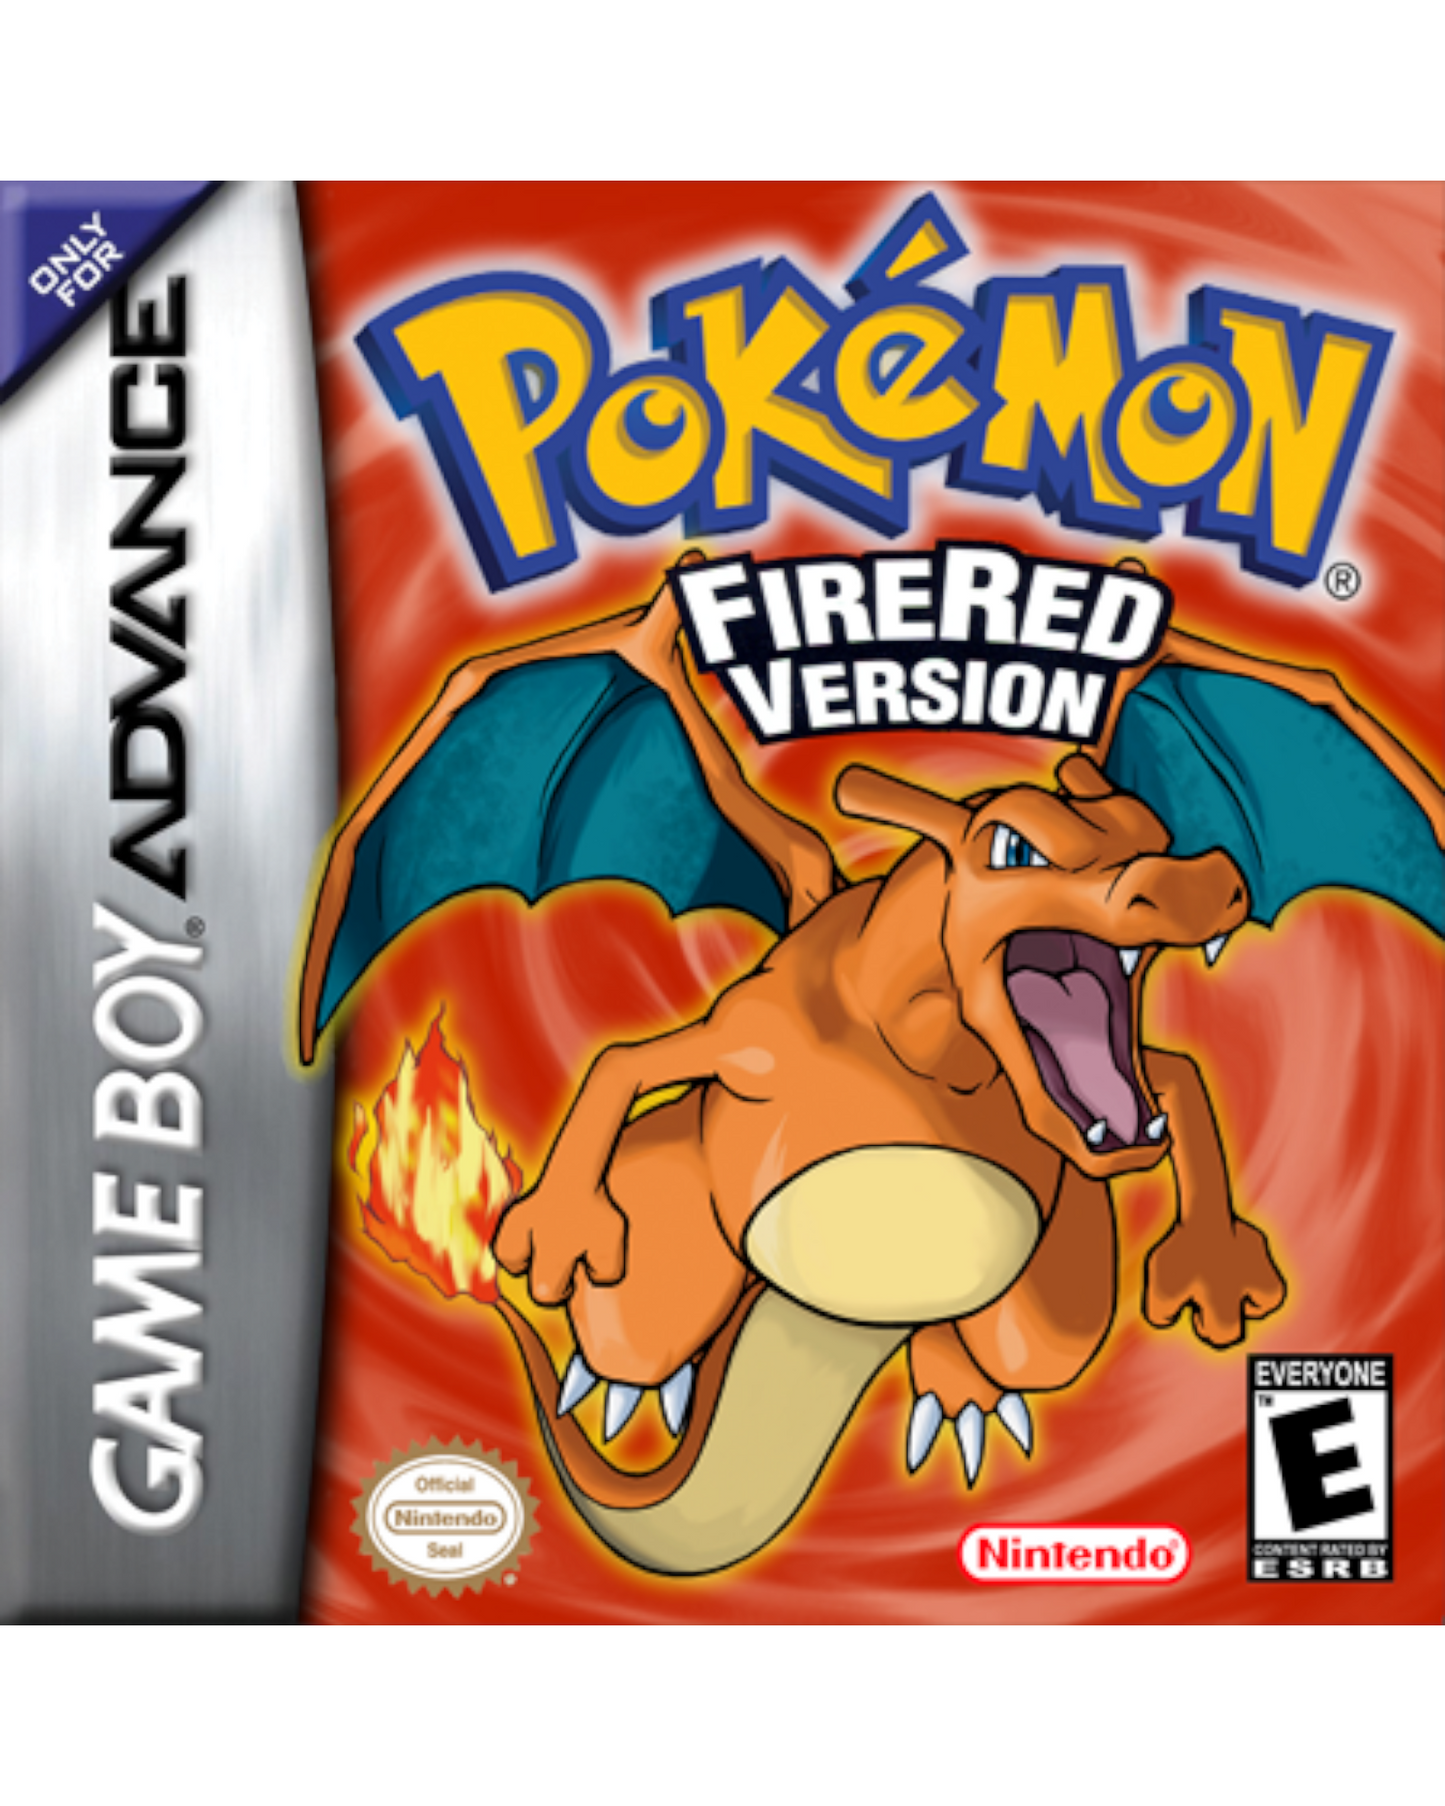 Pokemon Fire Red PS5 Version Full Game Free Download